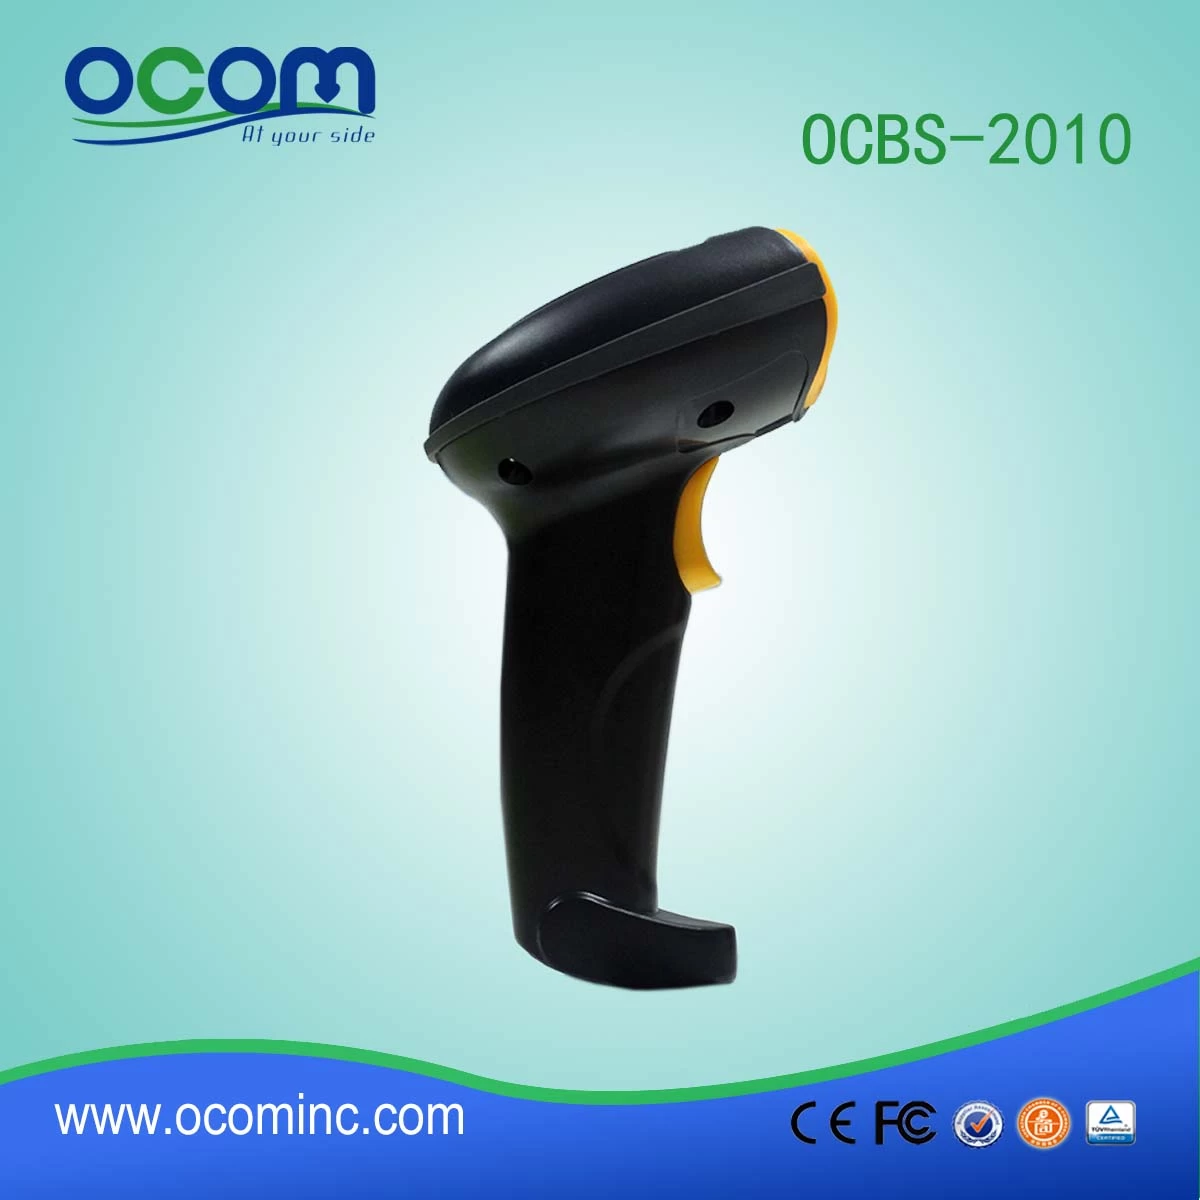 OCBS-2010: High Speed Barcode Scanner USB And Rs232 Avaliable